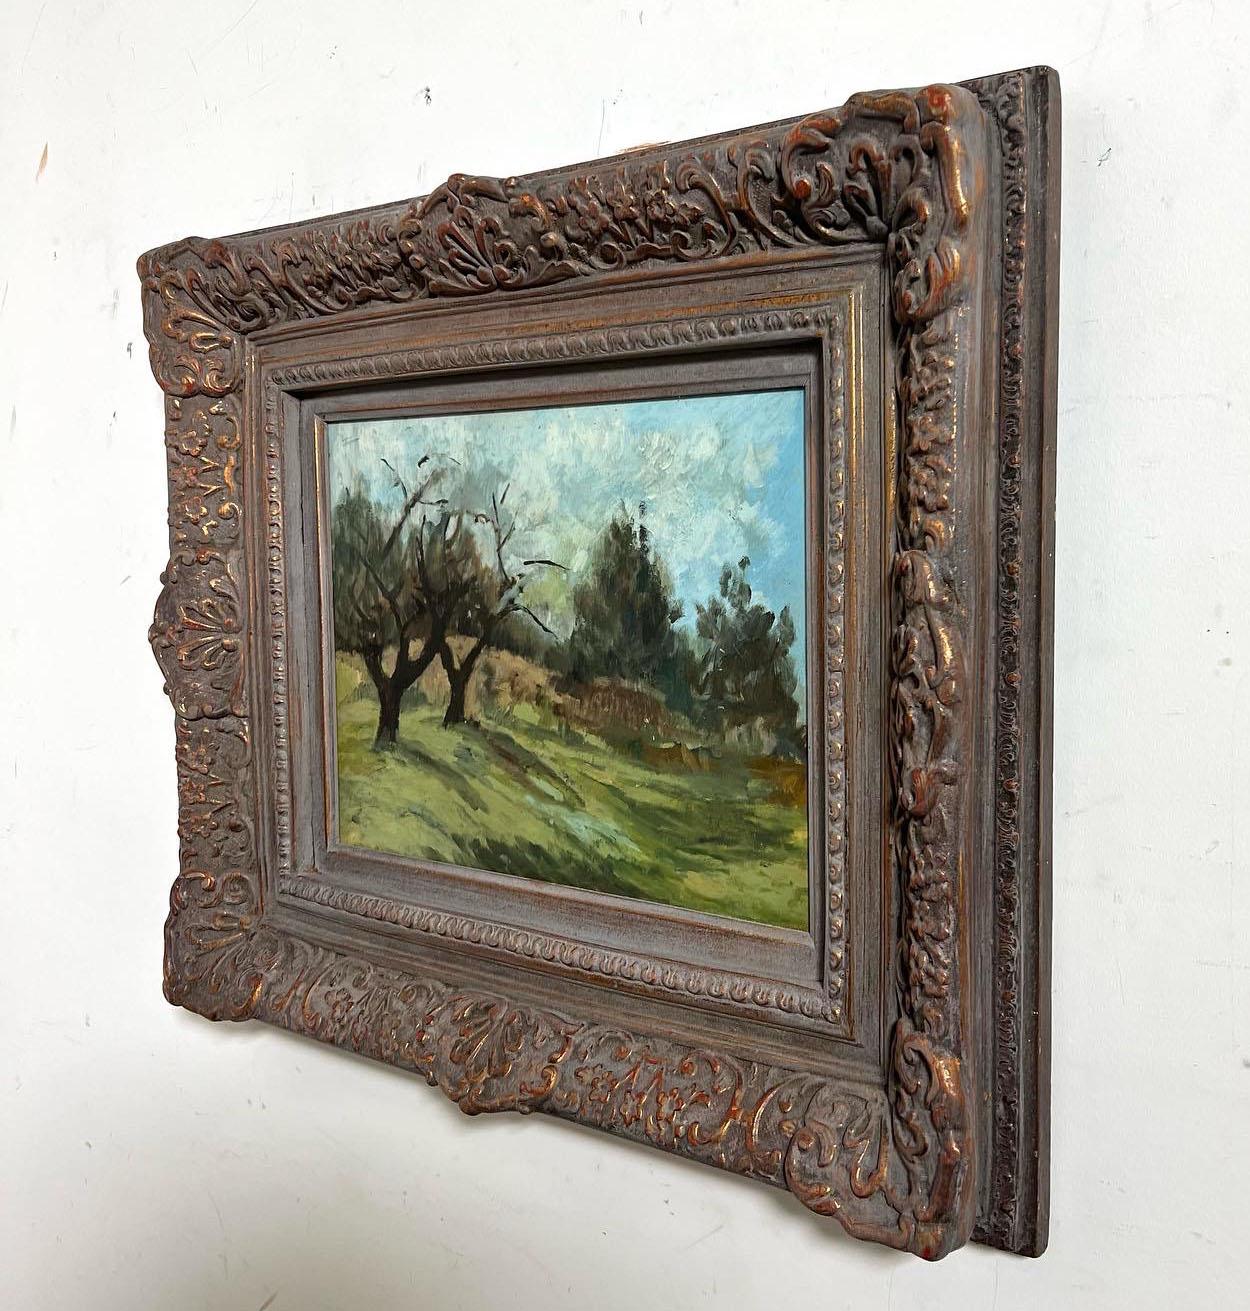 An impressionist landscape by the Massachusetts artist Gertrude Ann Youse. Known affectionately as Gay, Youse was a graduate of the School of the Museum of Fine Arts in the 1940s where she was influenced by the Austrian Expressionist Oskar